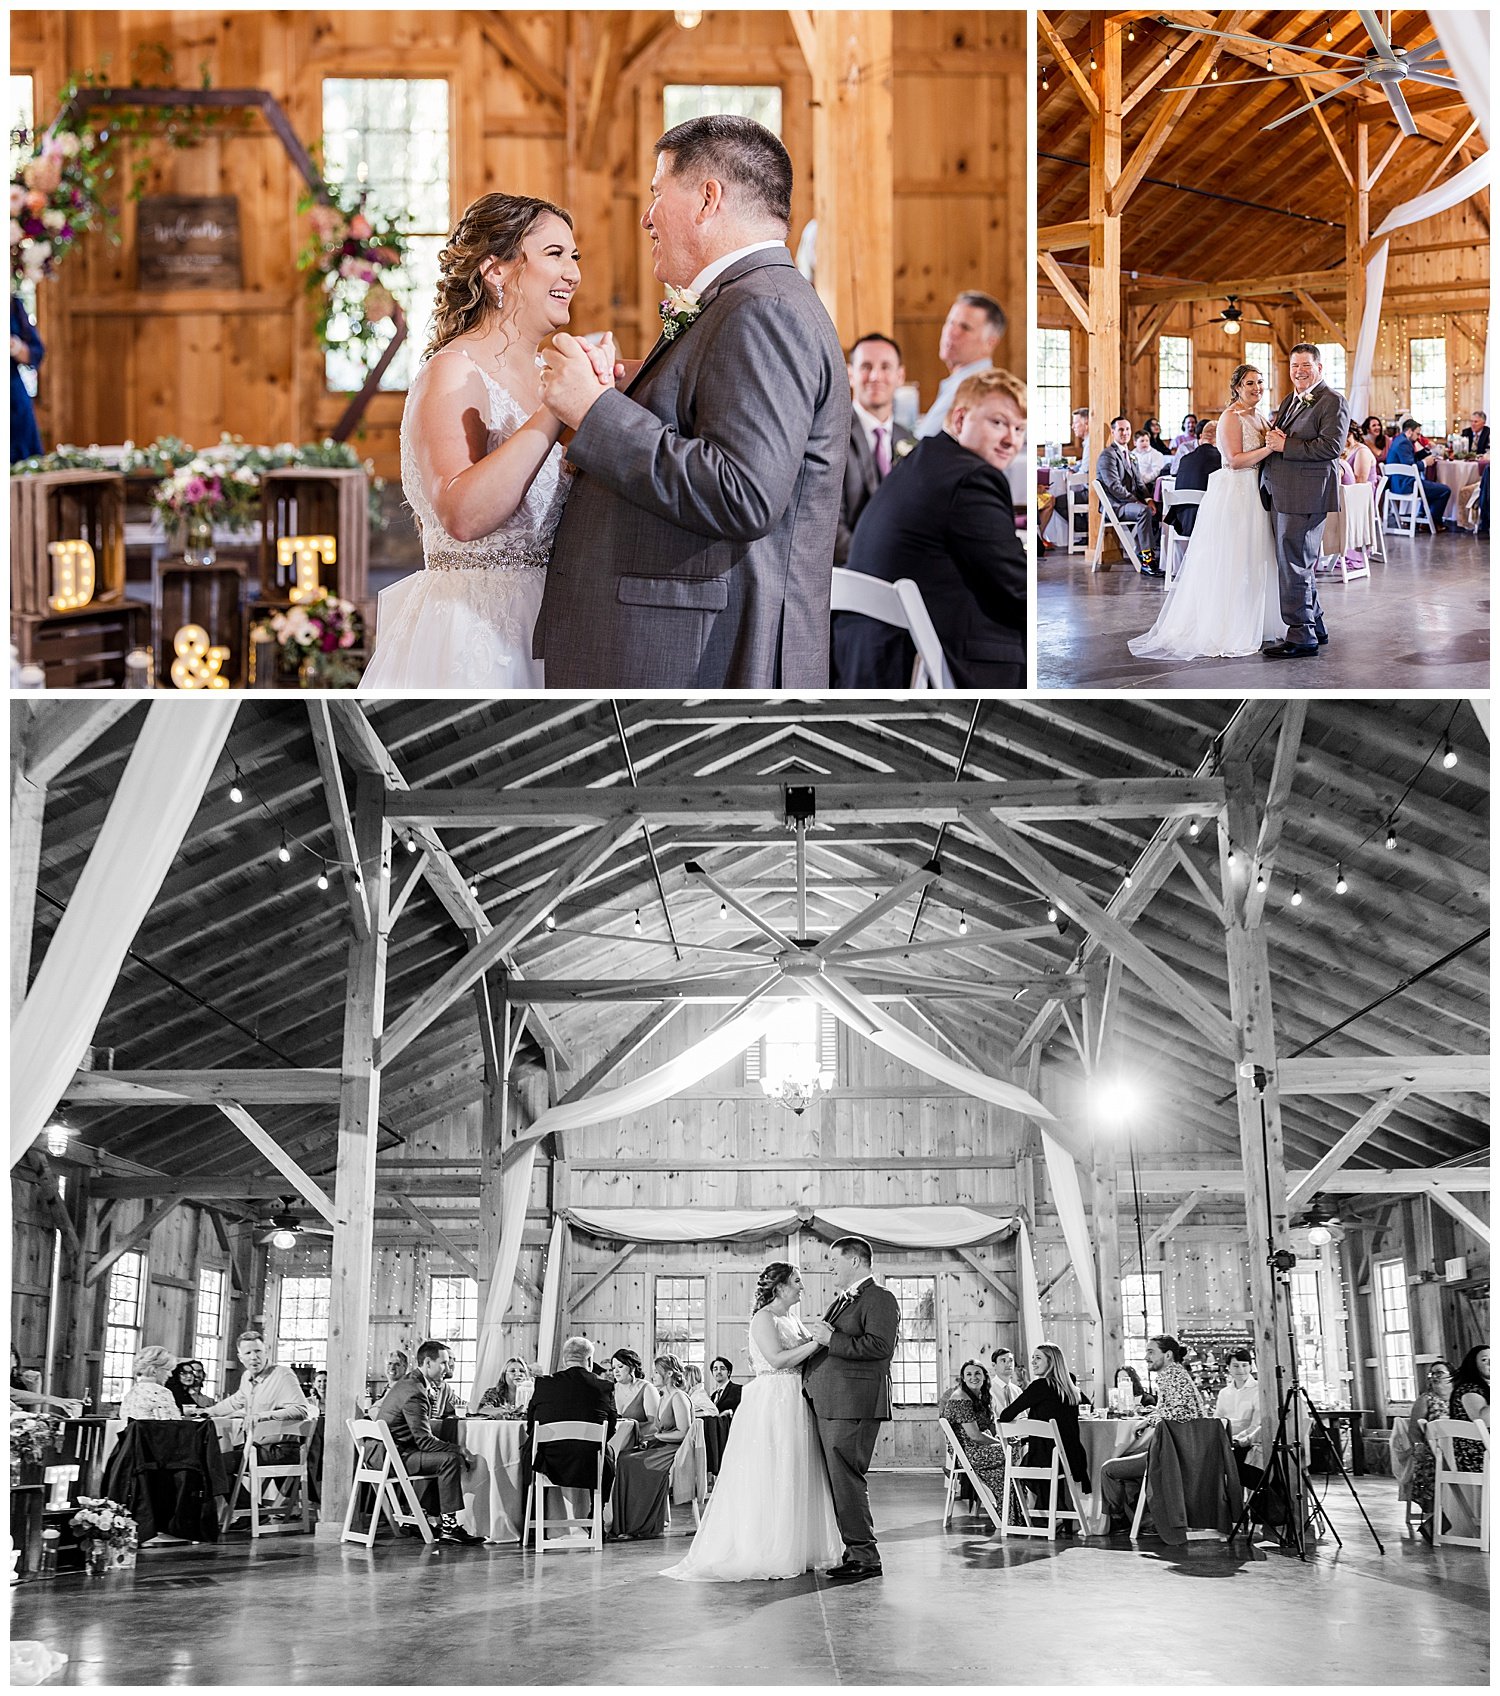 Therese Dan Married Pond View Farm Wedding Living Radiant Photography Blog_0069.jpg